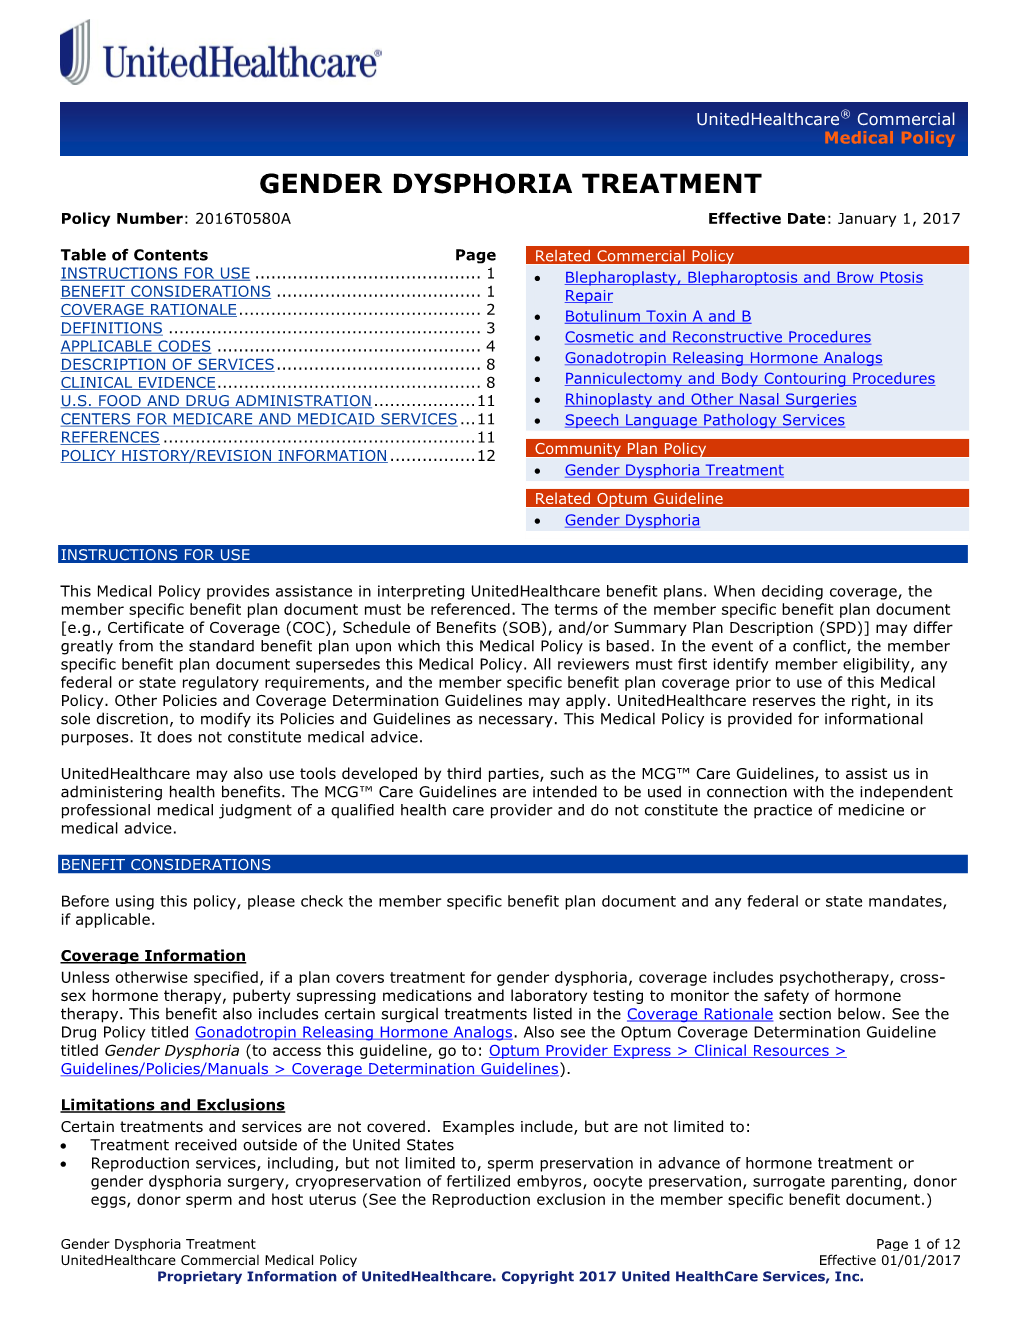 GENDER DYSPHORIA TREATMENT Policy Number: 2016T0580A Effective Date: January 1, 2017